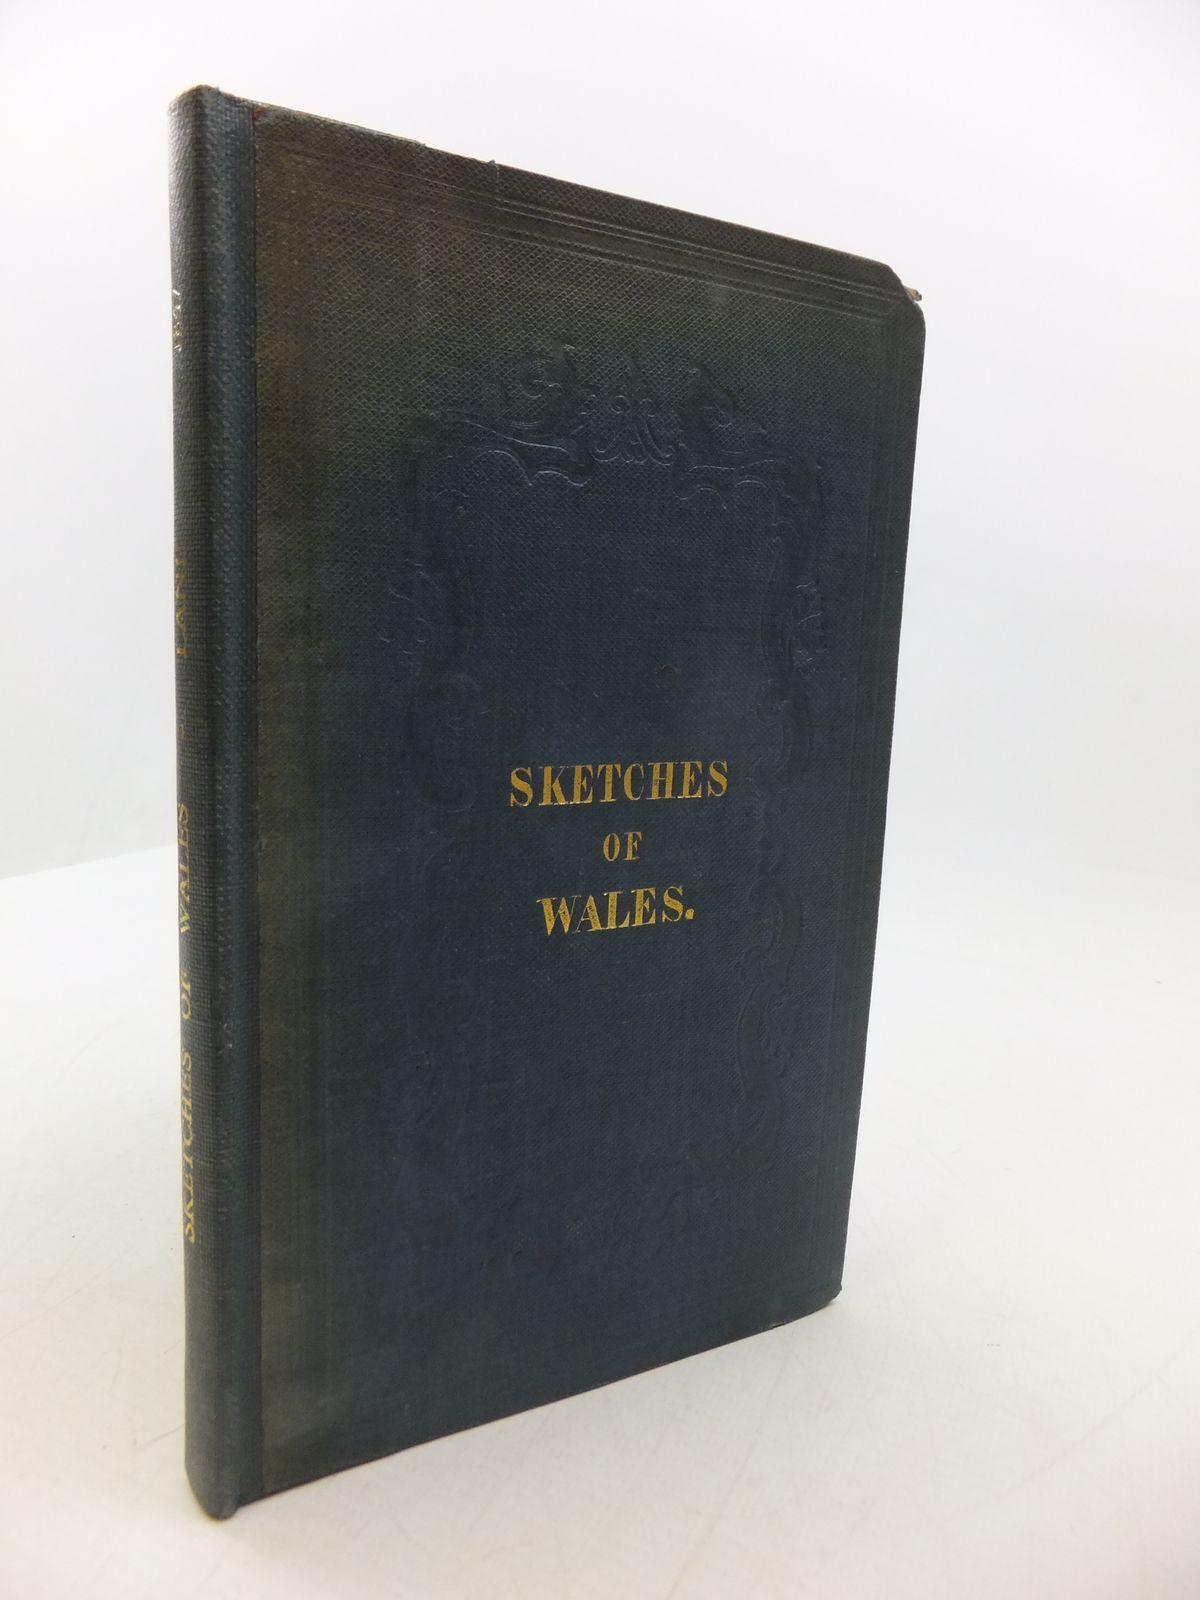 Photo of SKETCHES OF WALES AND THE WELSH written by Amy,  published by Hamilton, Adams, and Co. (STOCK CODE: 1807583)  for sale by Stella & Rose's Books